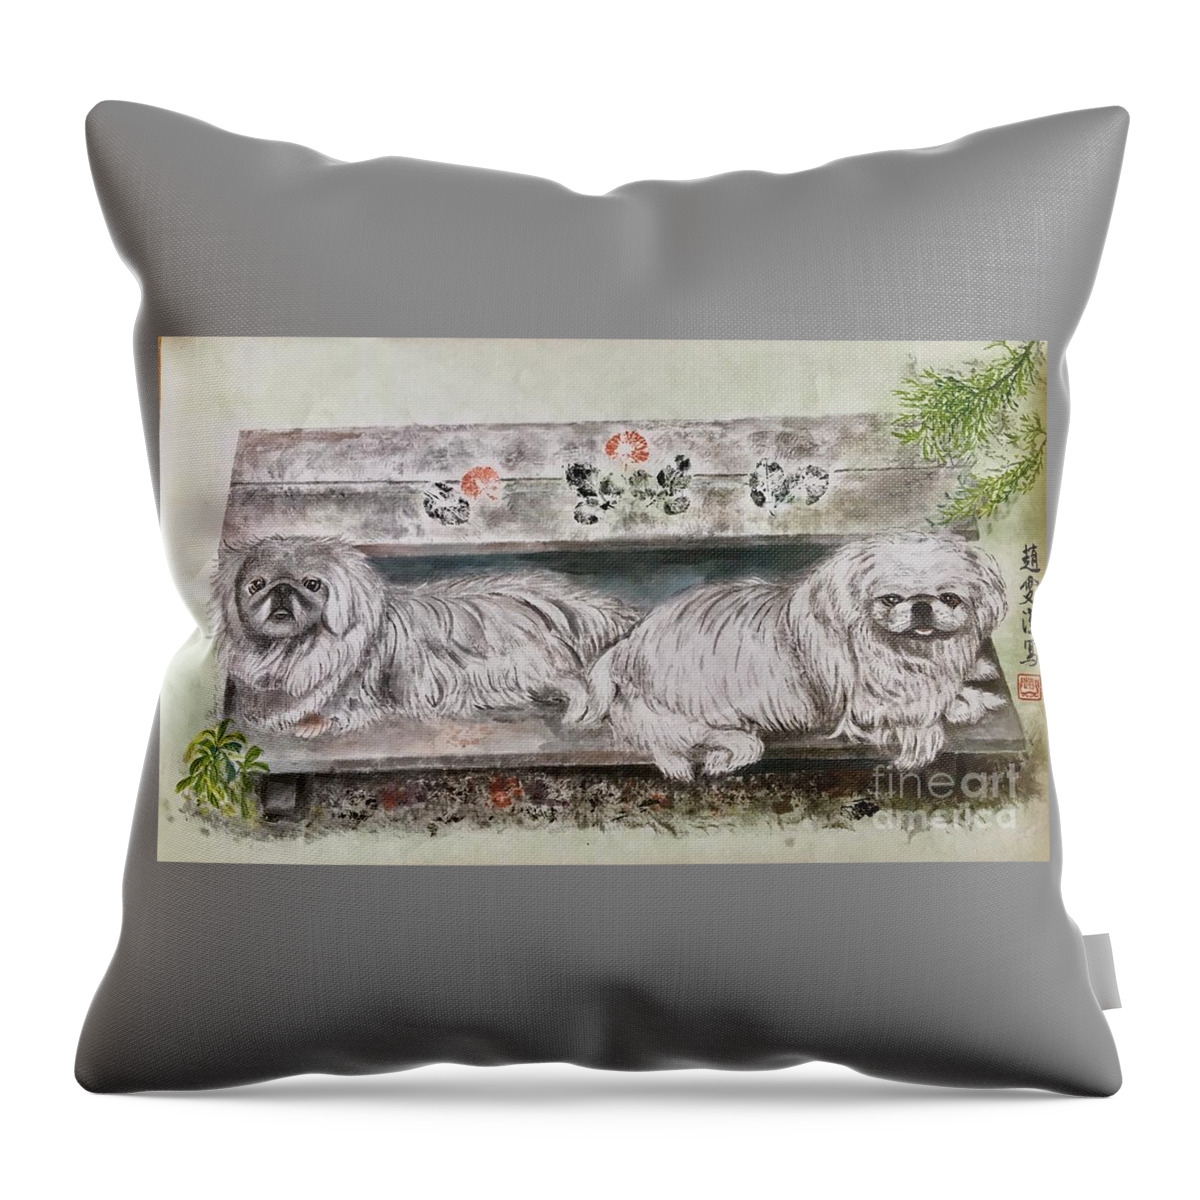 Pekes Dog Throw Pillow featuring the painting Two Pekes Dogs by Carmen Lam